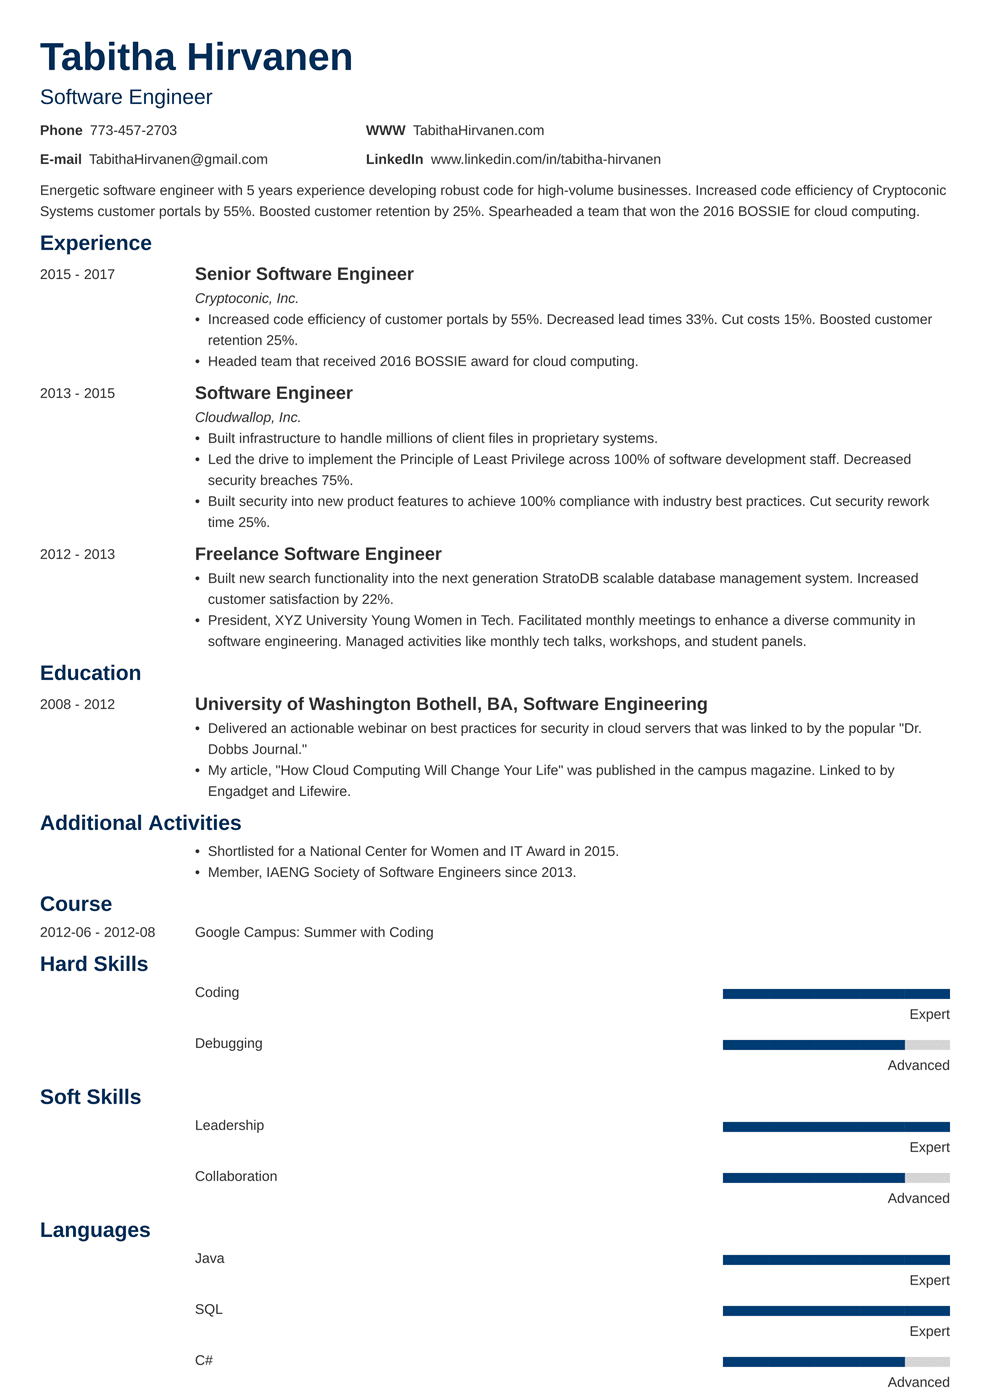 1 Year Experience Resume Format For Software Developer from cdn-images.zety.com